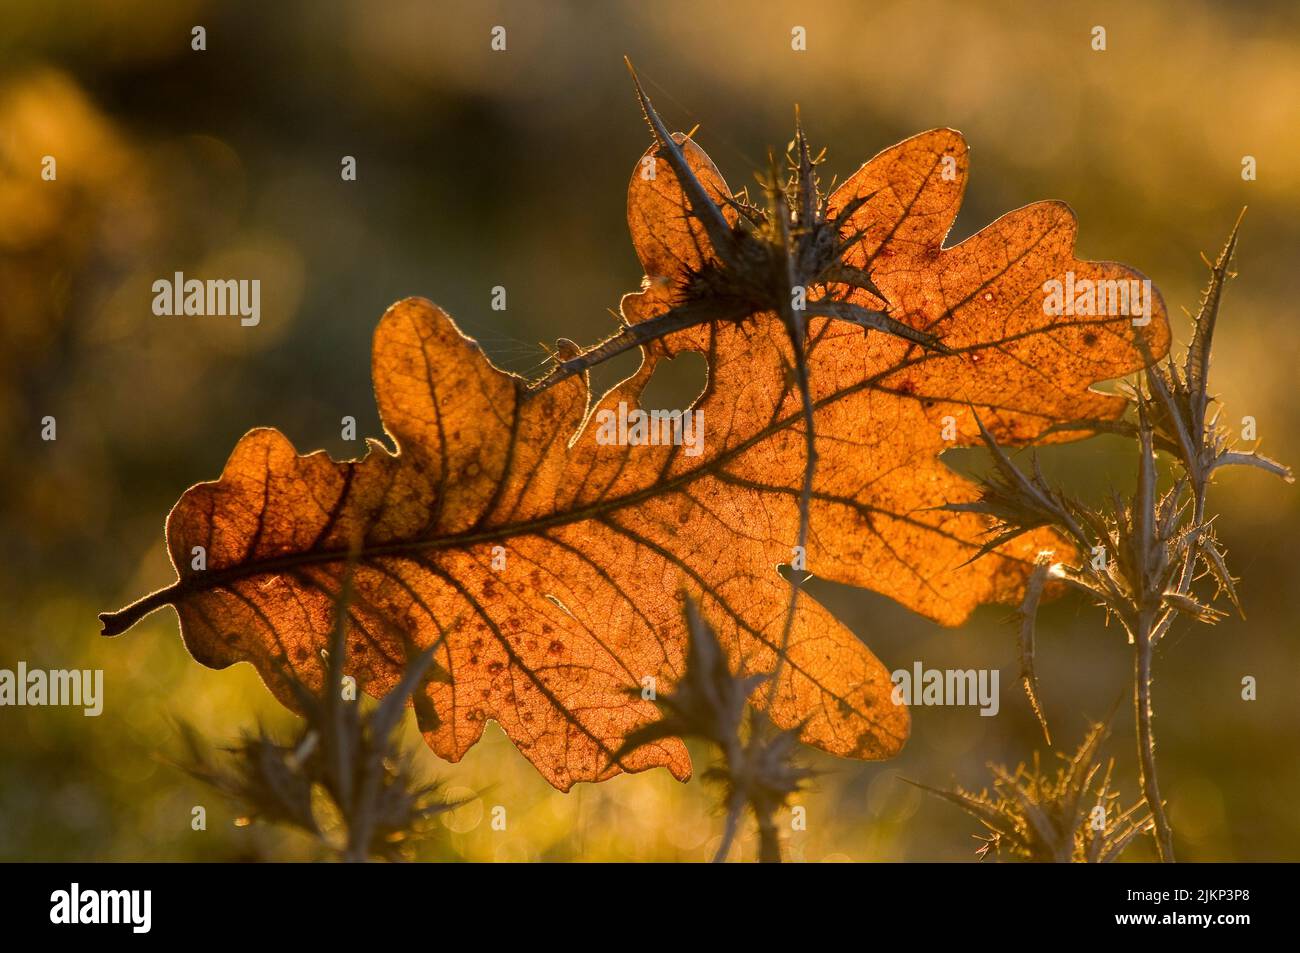 A fallen brown autumn leaf against bokeh lights on a blurry background Stock Photo